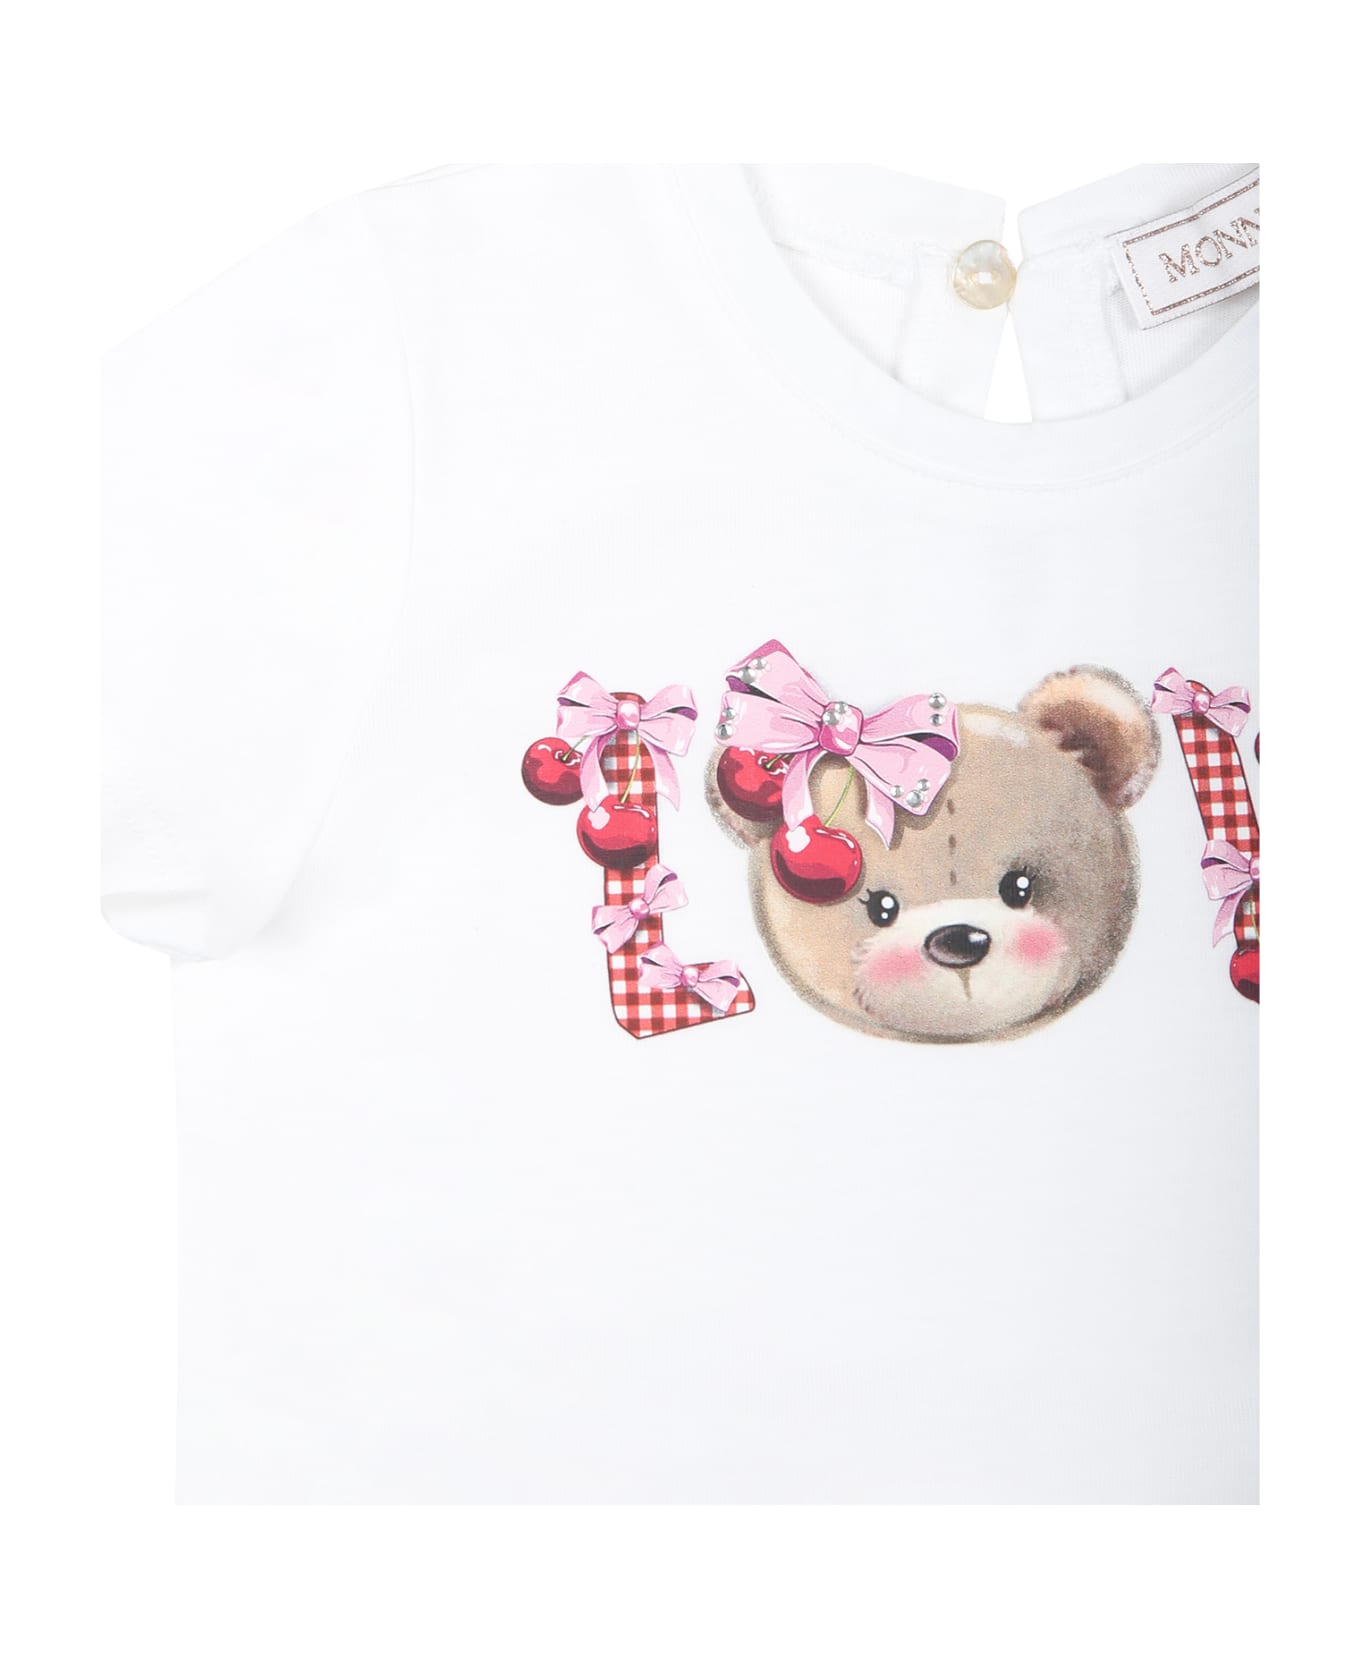 Monnalisa White T-shirt For Baby Girl With Bear Print And Writing - White